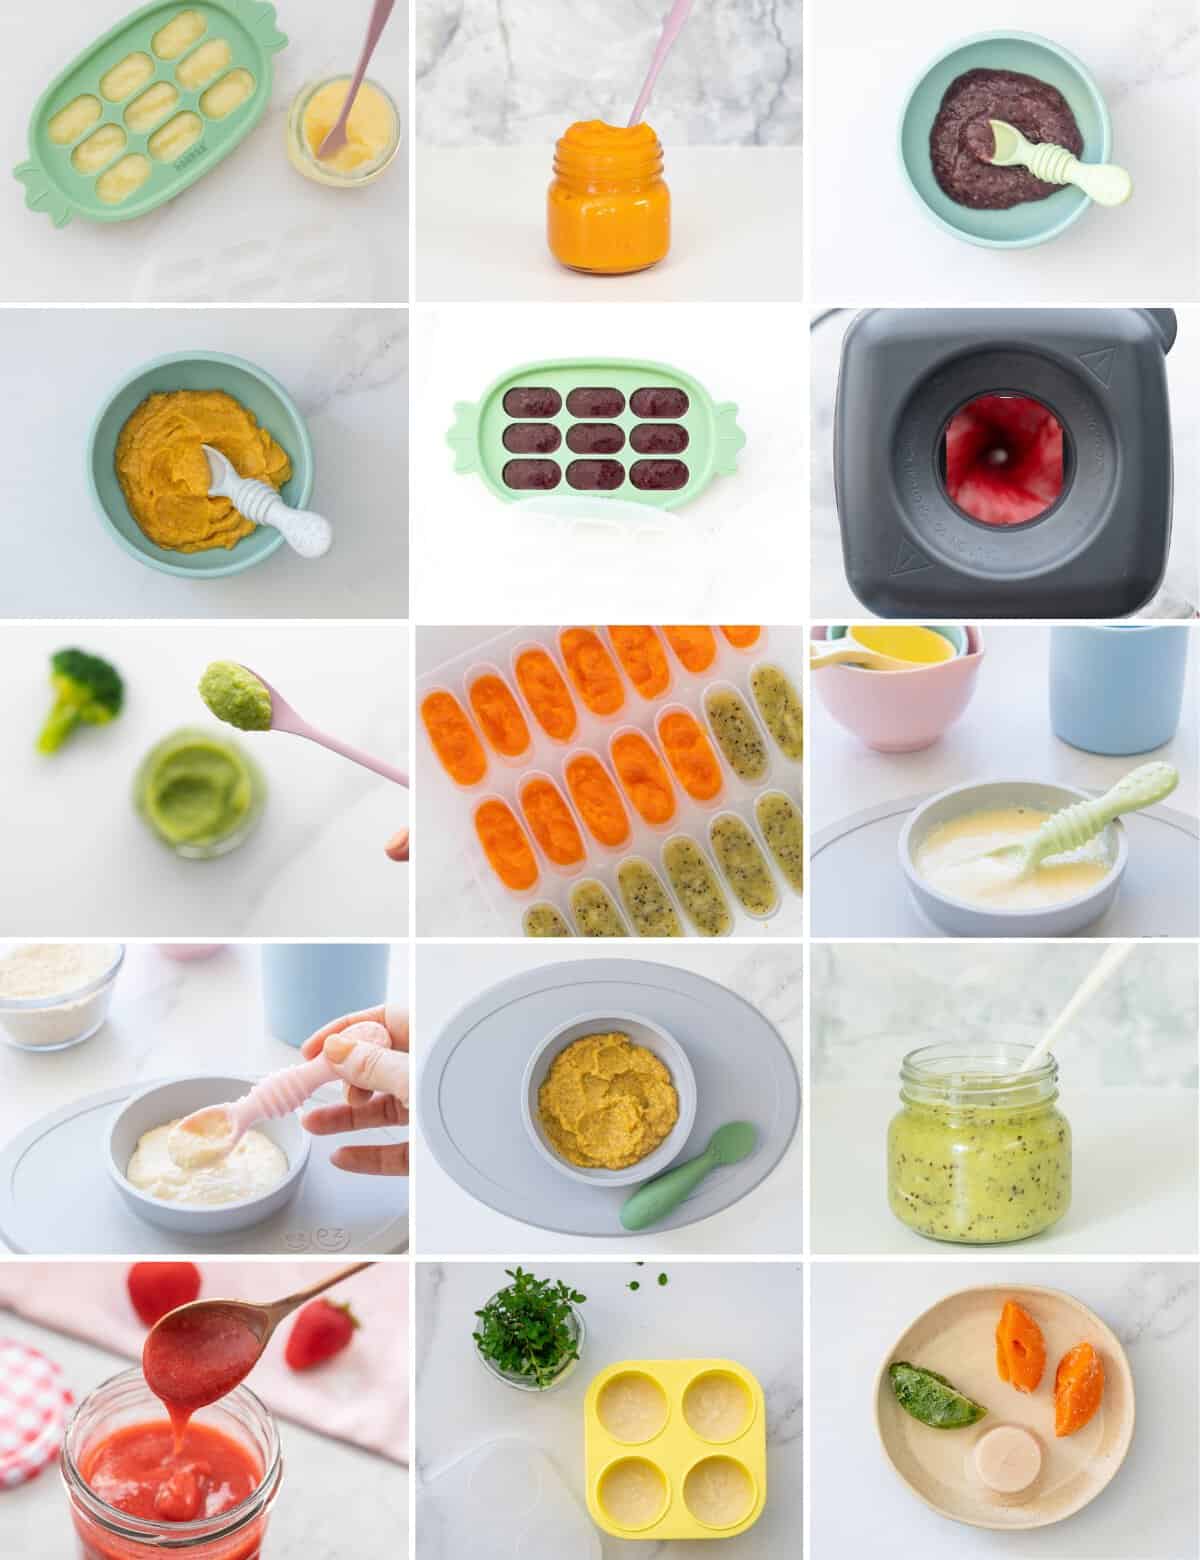 A collage of 24 images of stage one and stage two baby purees in storage jars, serving bowls and freezer trays. 